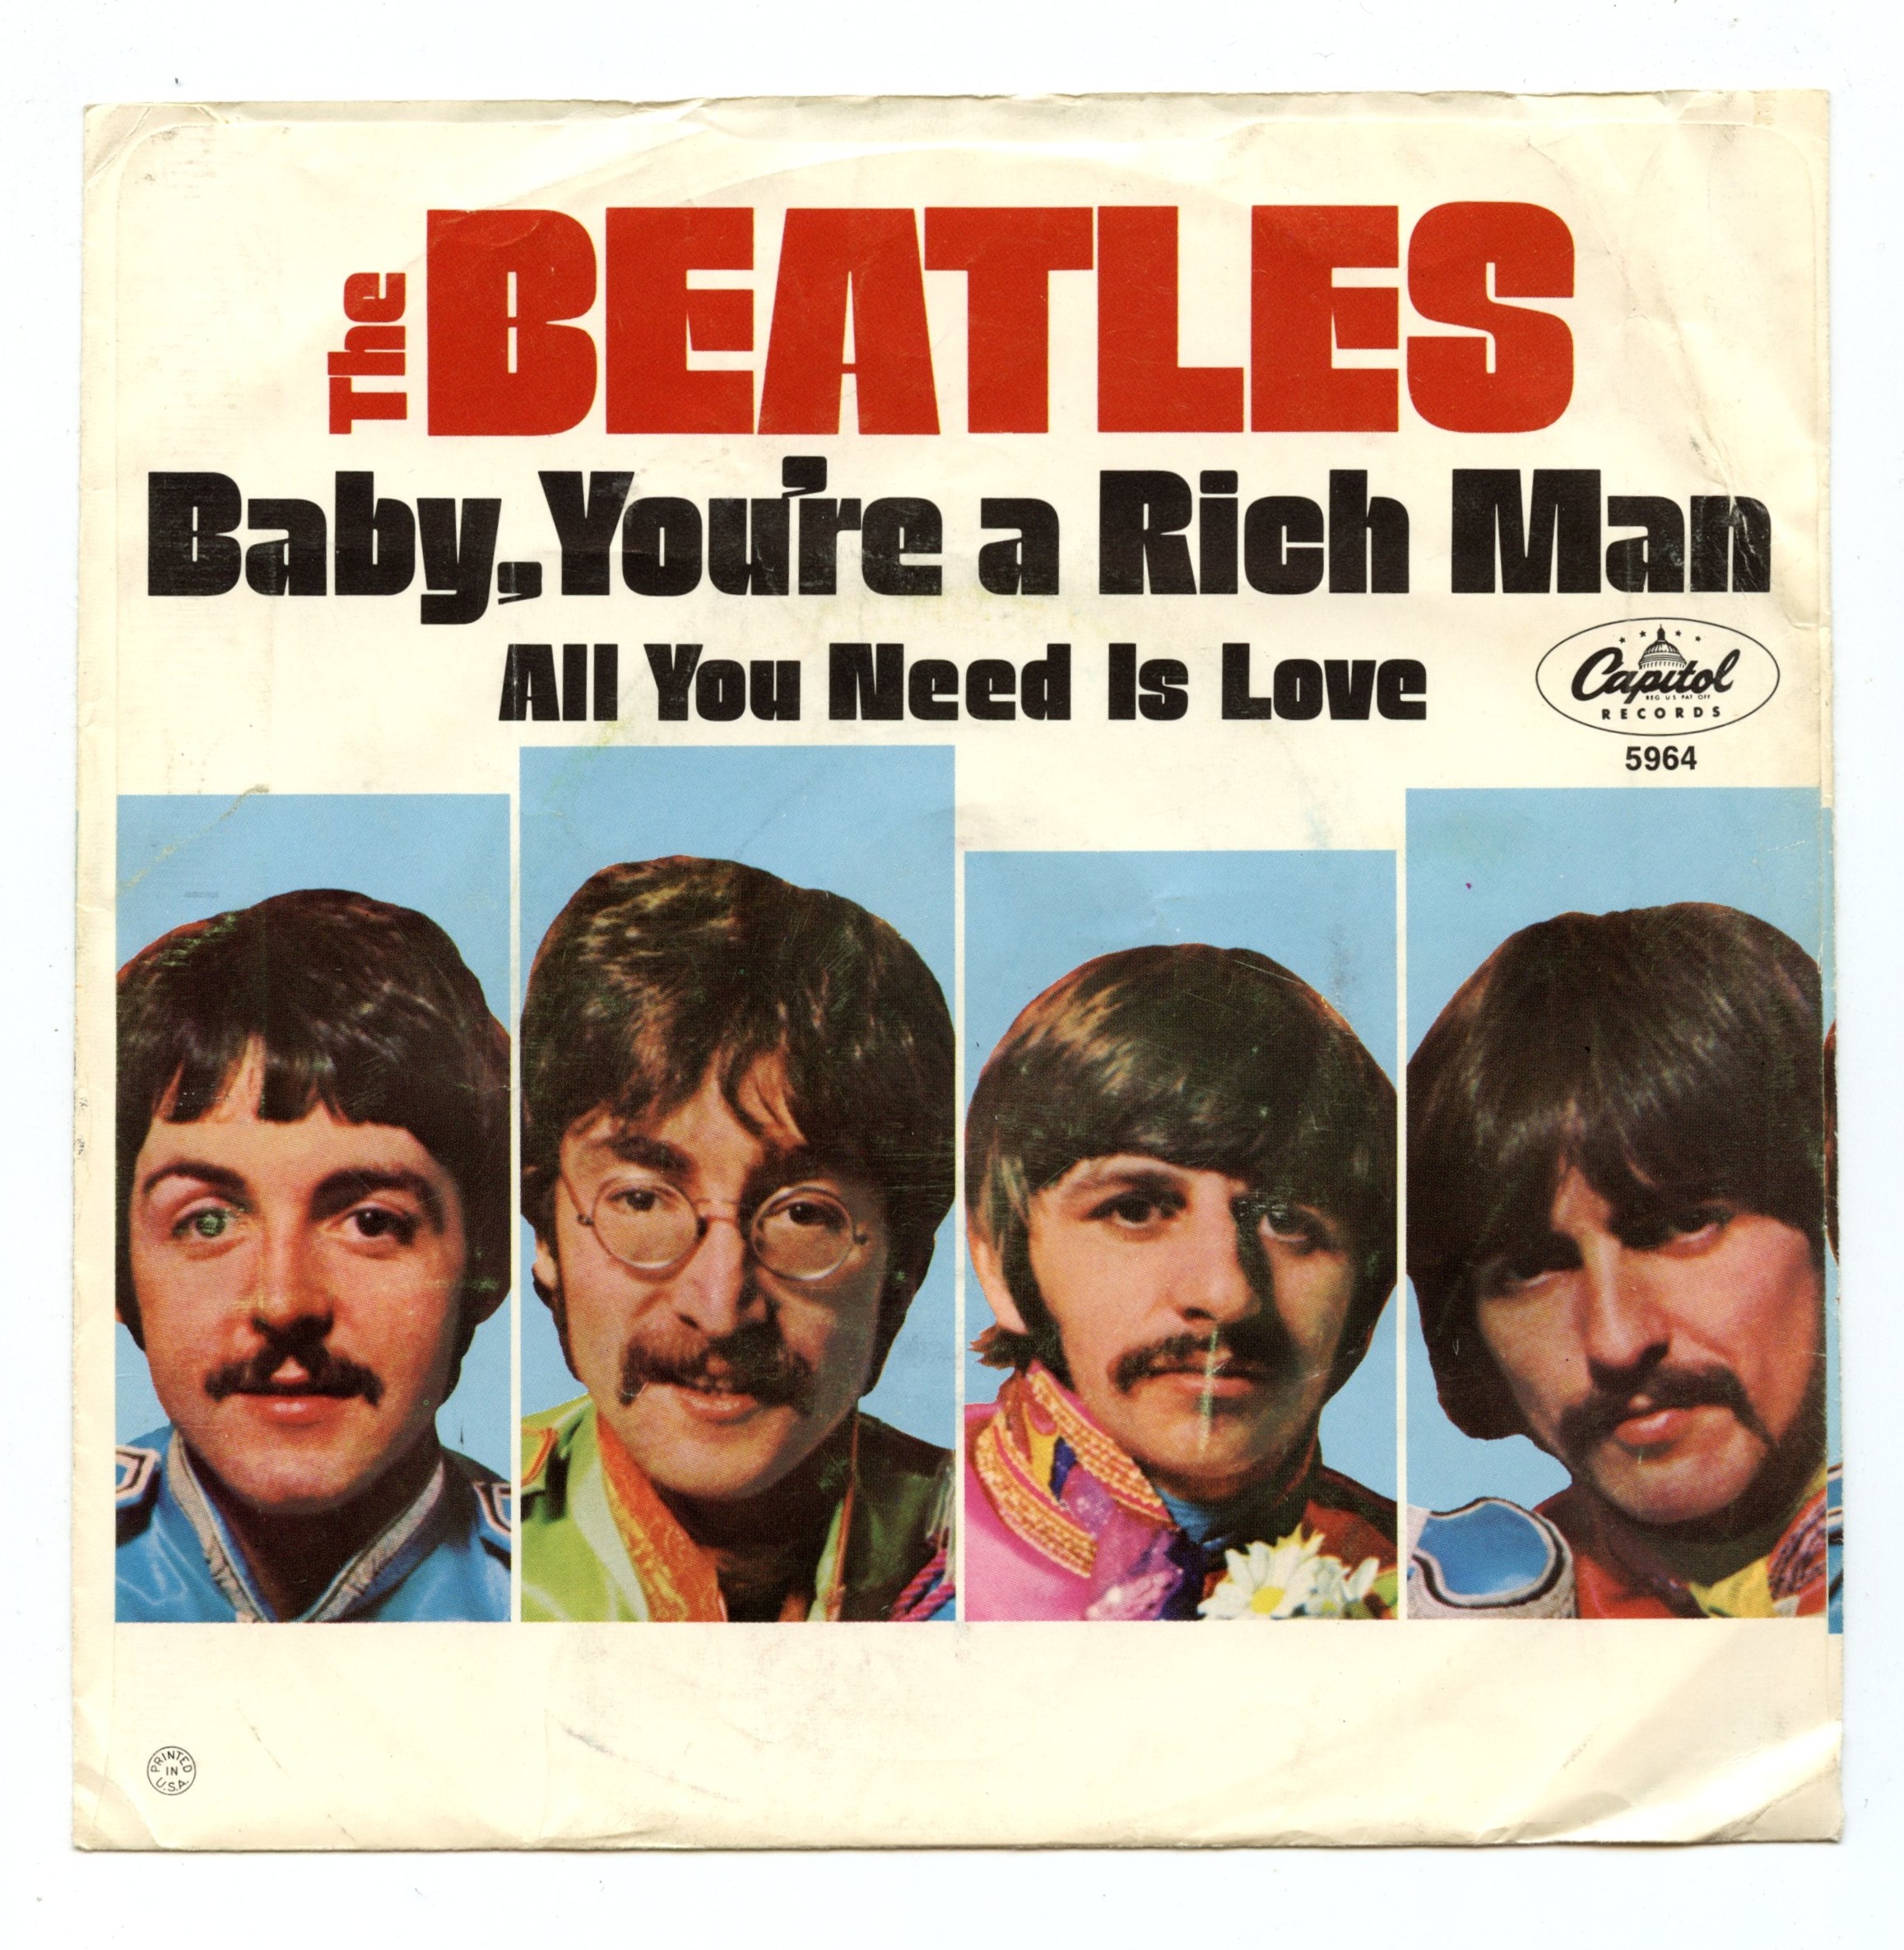 The Beatles Vinyl Single All You Need is Love 1967